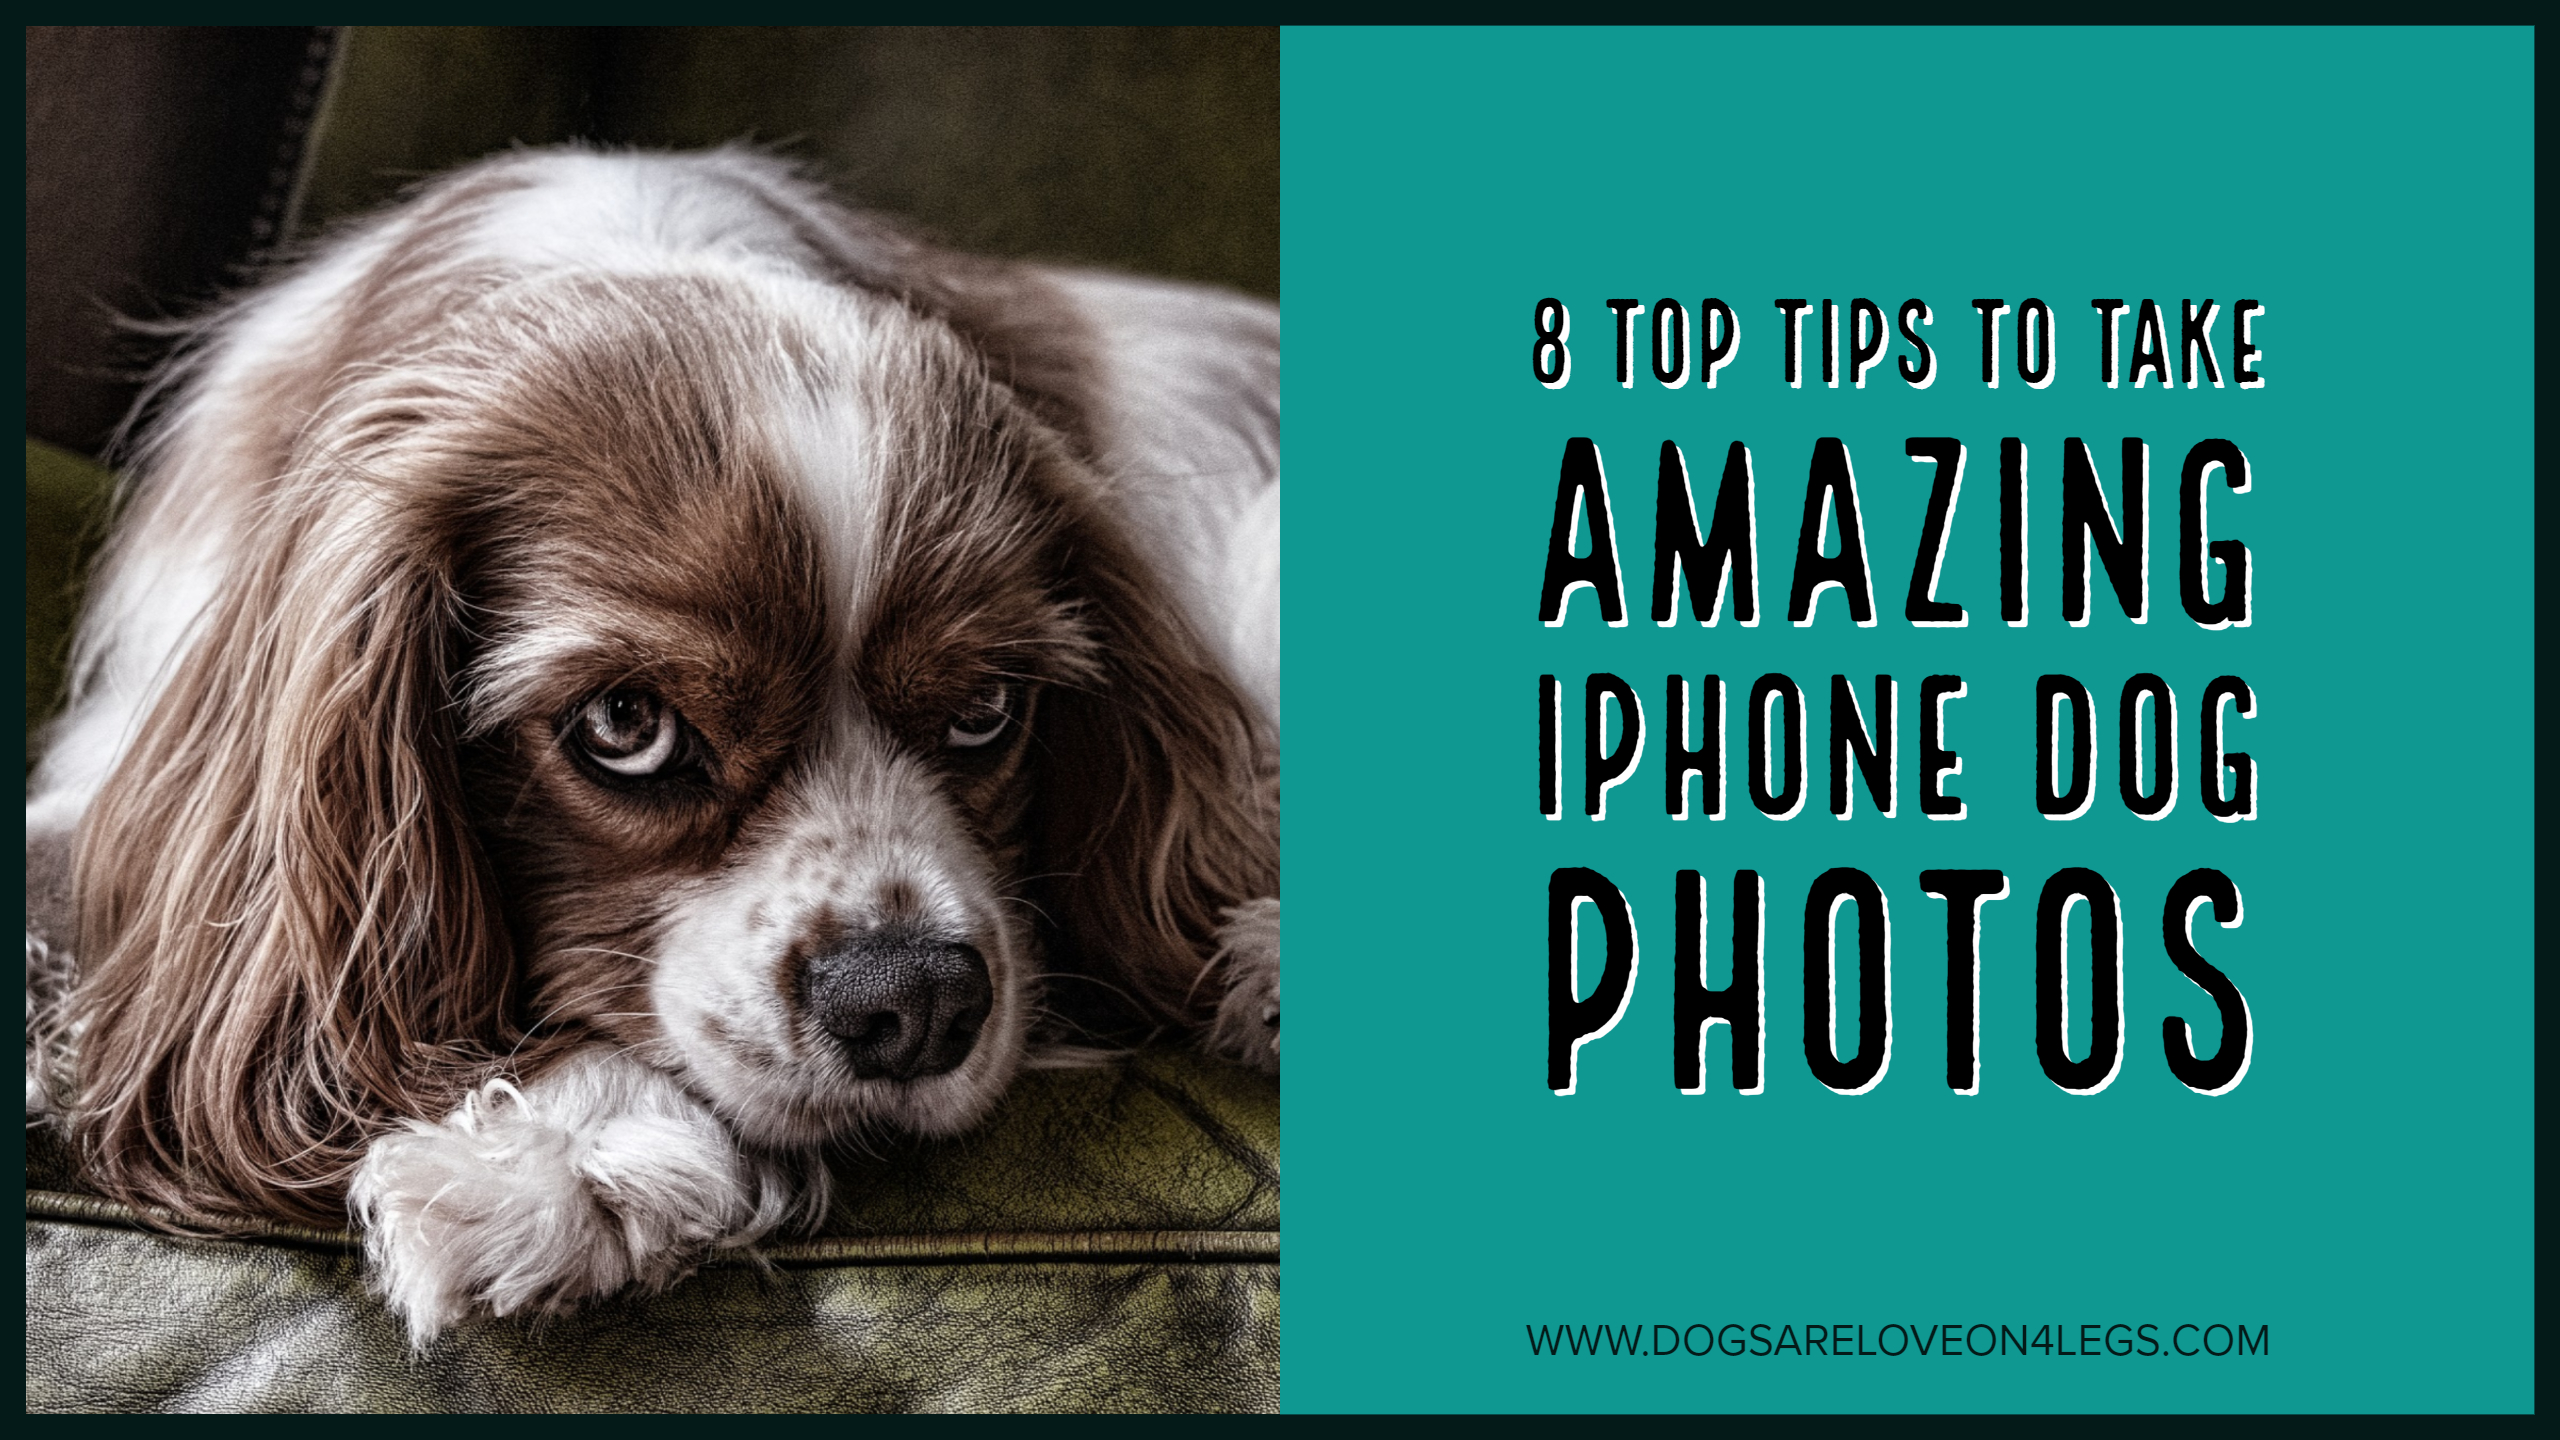 8 Top Tips To Take Amazing iPhone Dog Photos